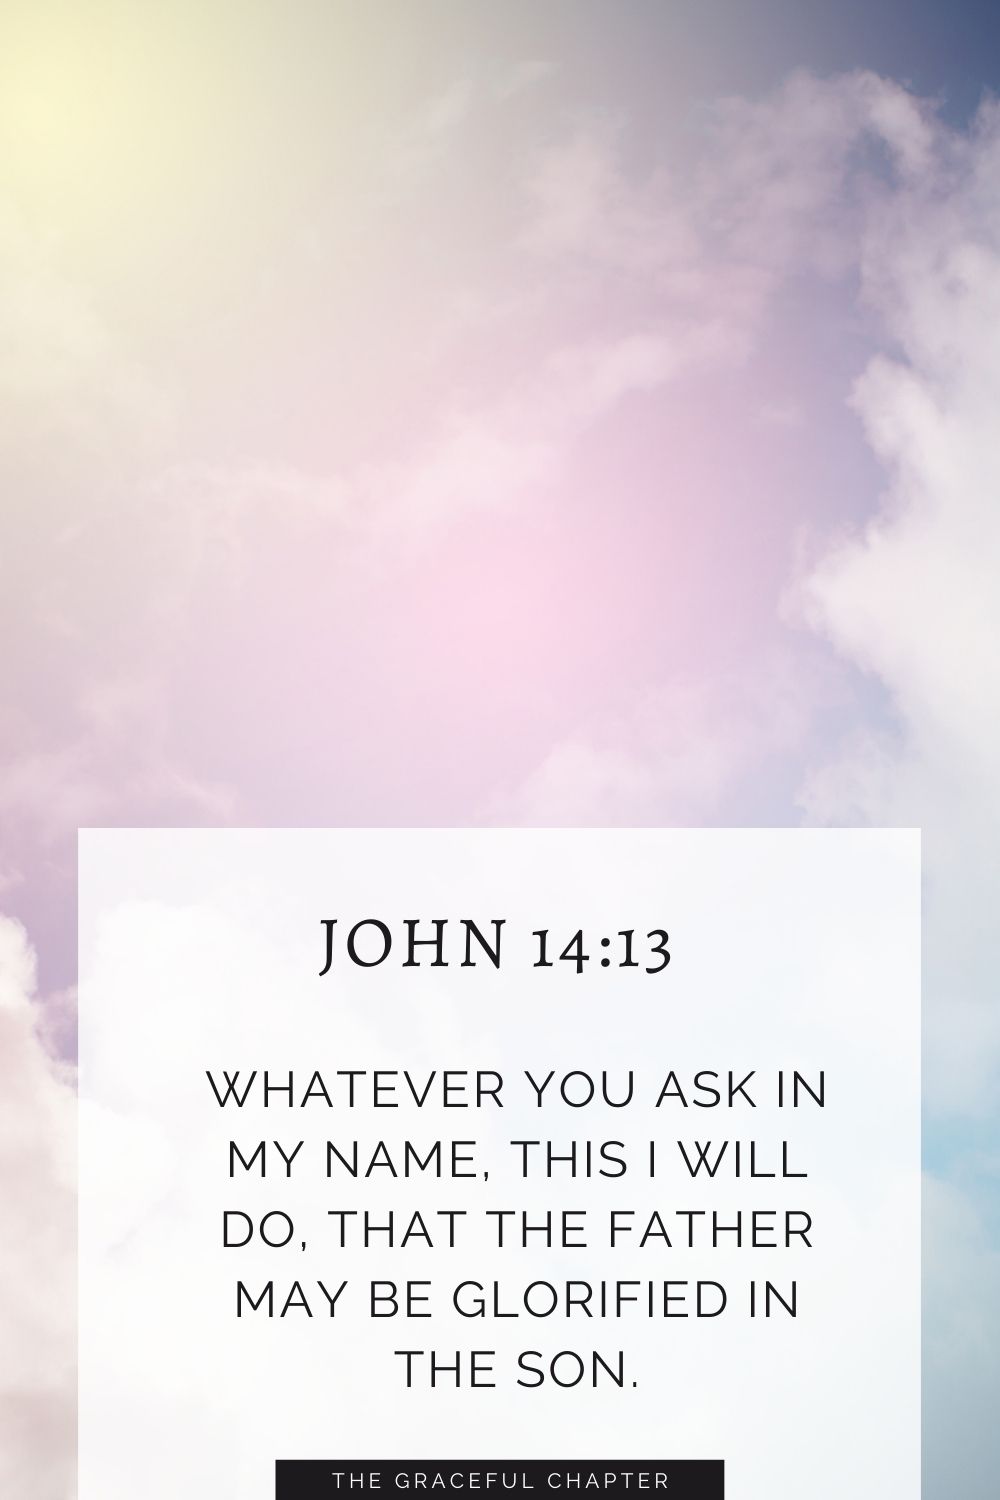 Whatever you ask in my name, this I will do, that the Father may be glorified in the Son. John 14:13